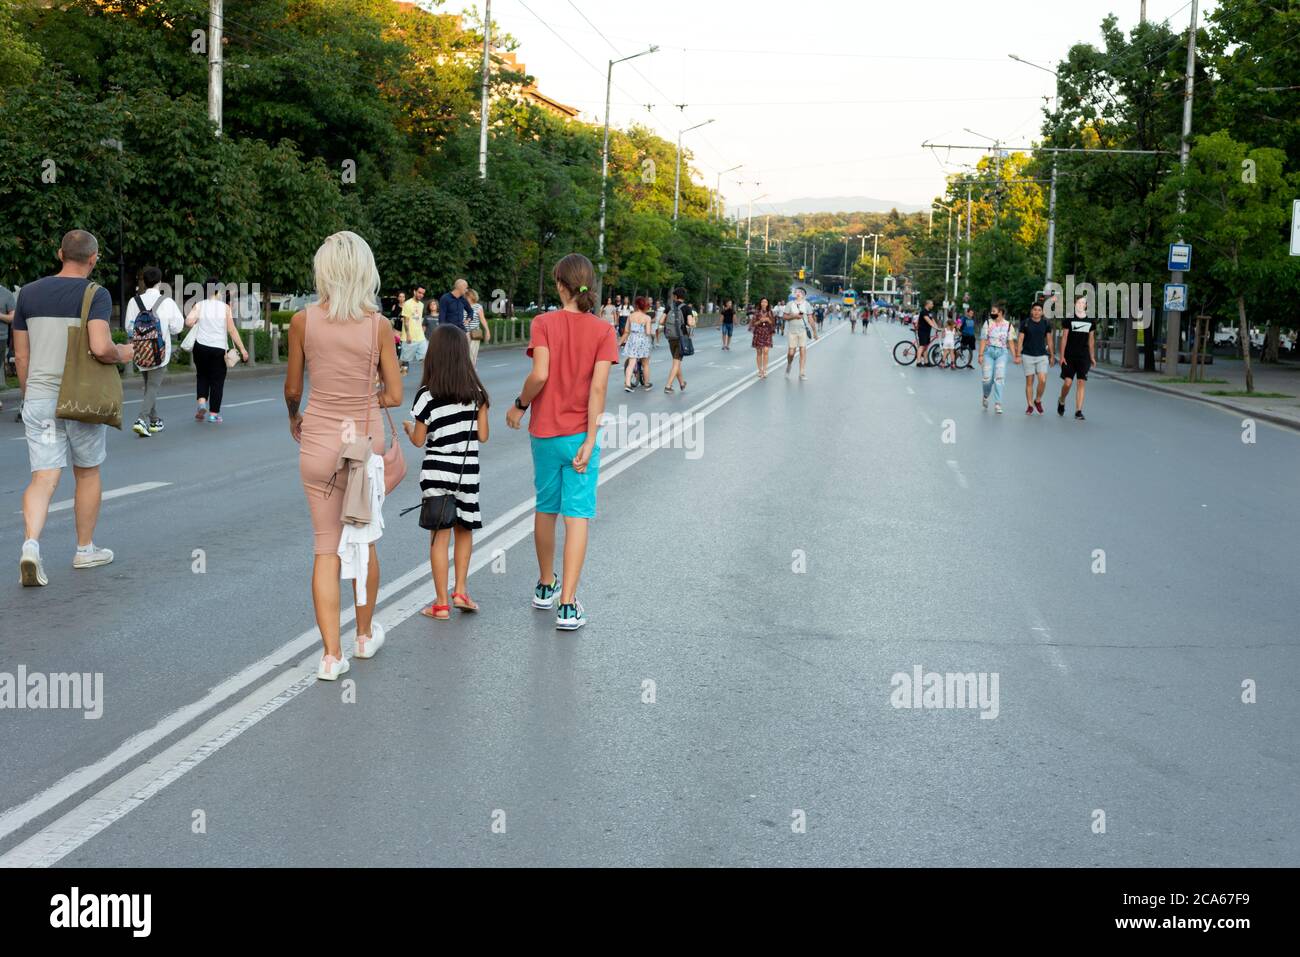 Sofia, Bulgaria. 3rd August 2020. People walking on closed street in Sofia Bulgaria as the anti-Government peaceful protests against corruption intensify across the country for the last 26 days with some major streets and intersections around the parliament building blocked by tents and barricades and the capital city centre is totally closed for transport. Credit: Ognyan Yosifov / Alamy News Stock Photo